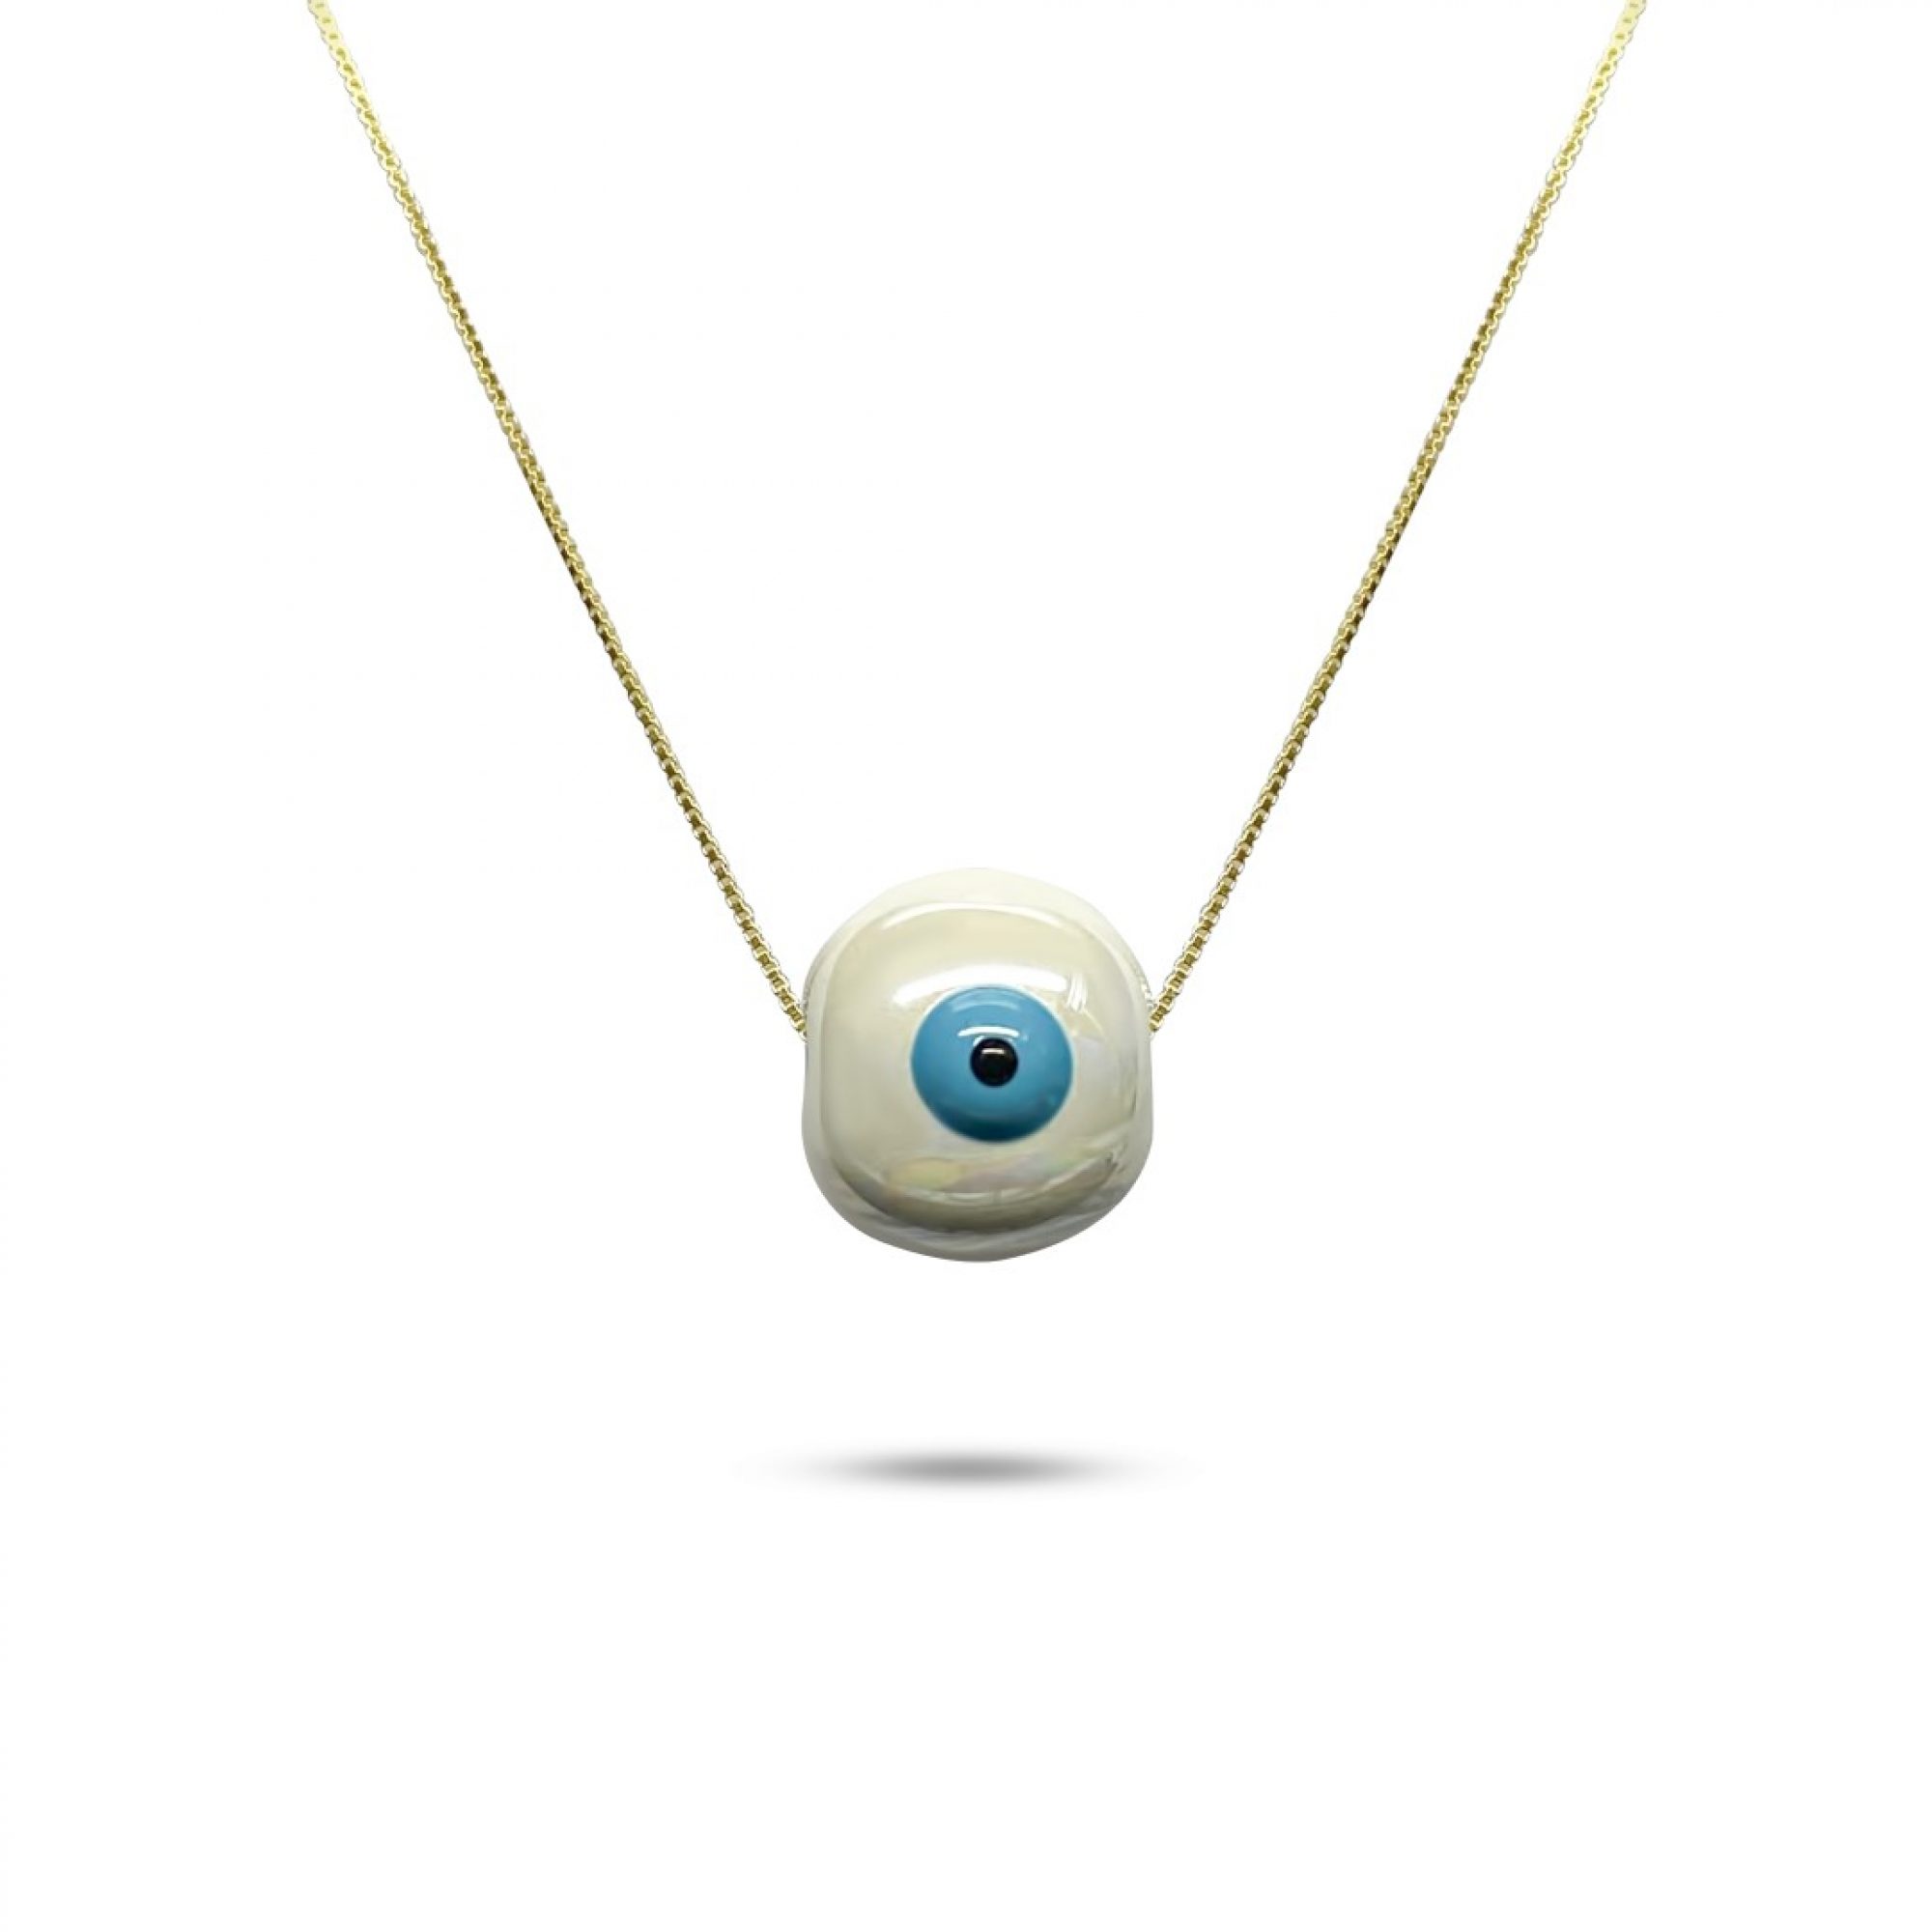 Gold plated eye bead necklace